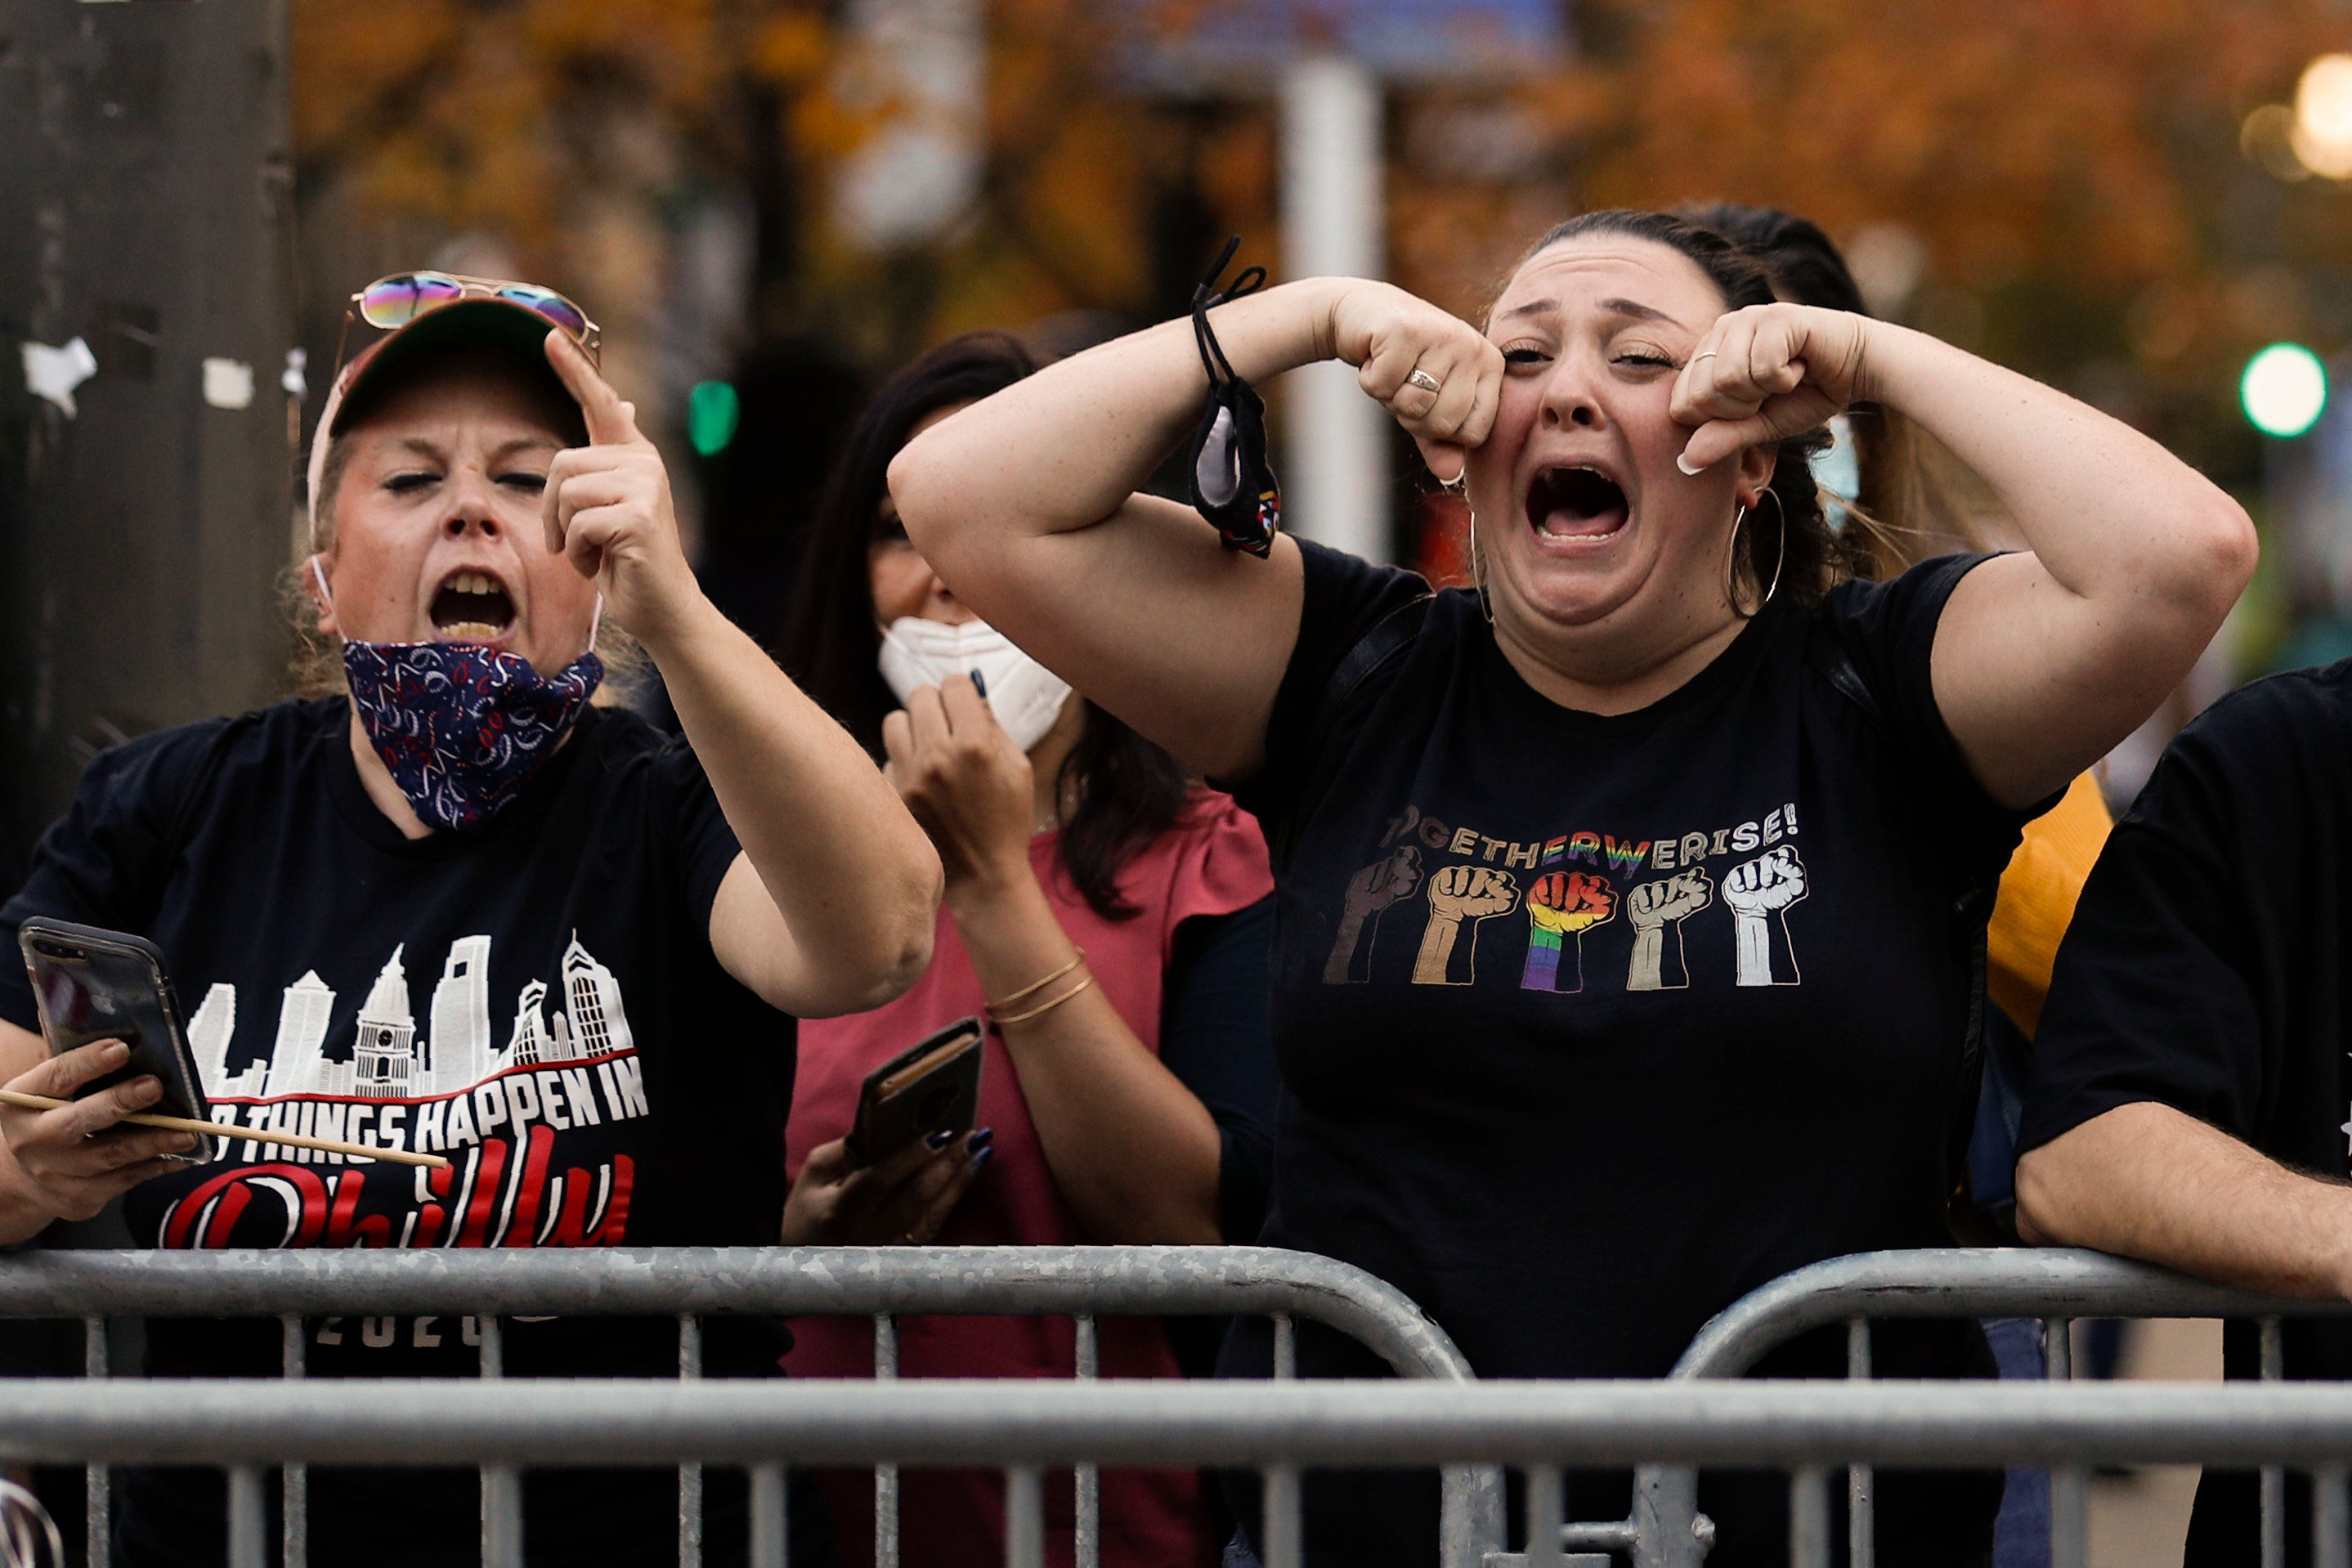 Joe Biden fans taunt Trump supporters in Washington, but the outgoing president could make moves which appeal to his base before he leaves office (AP Photo/Rebecca Blackwell)